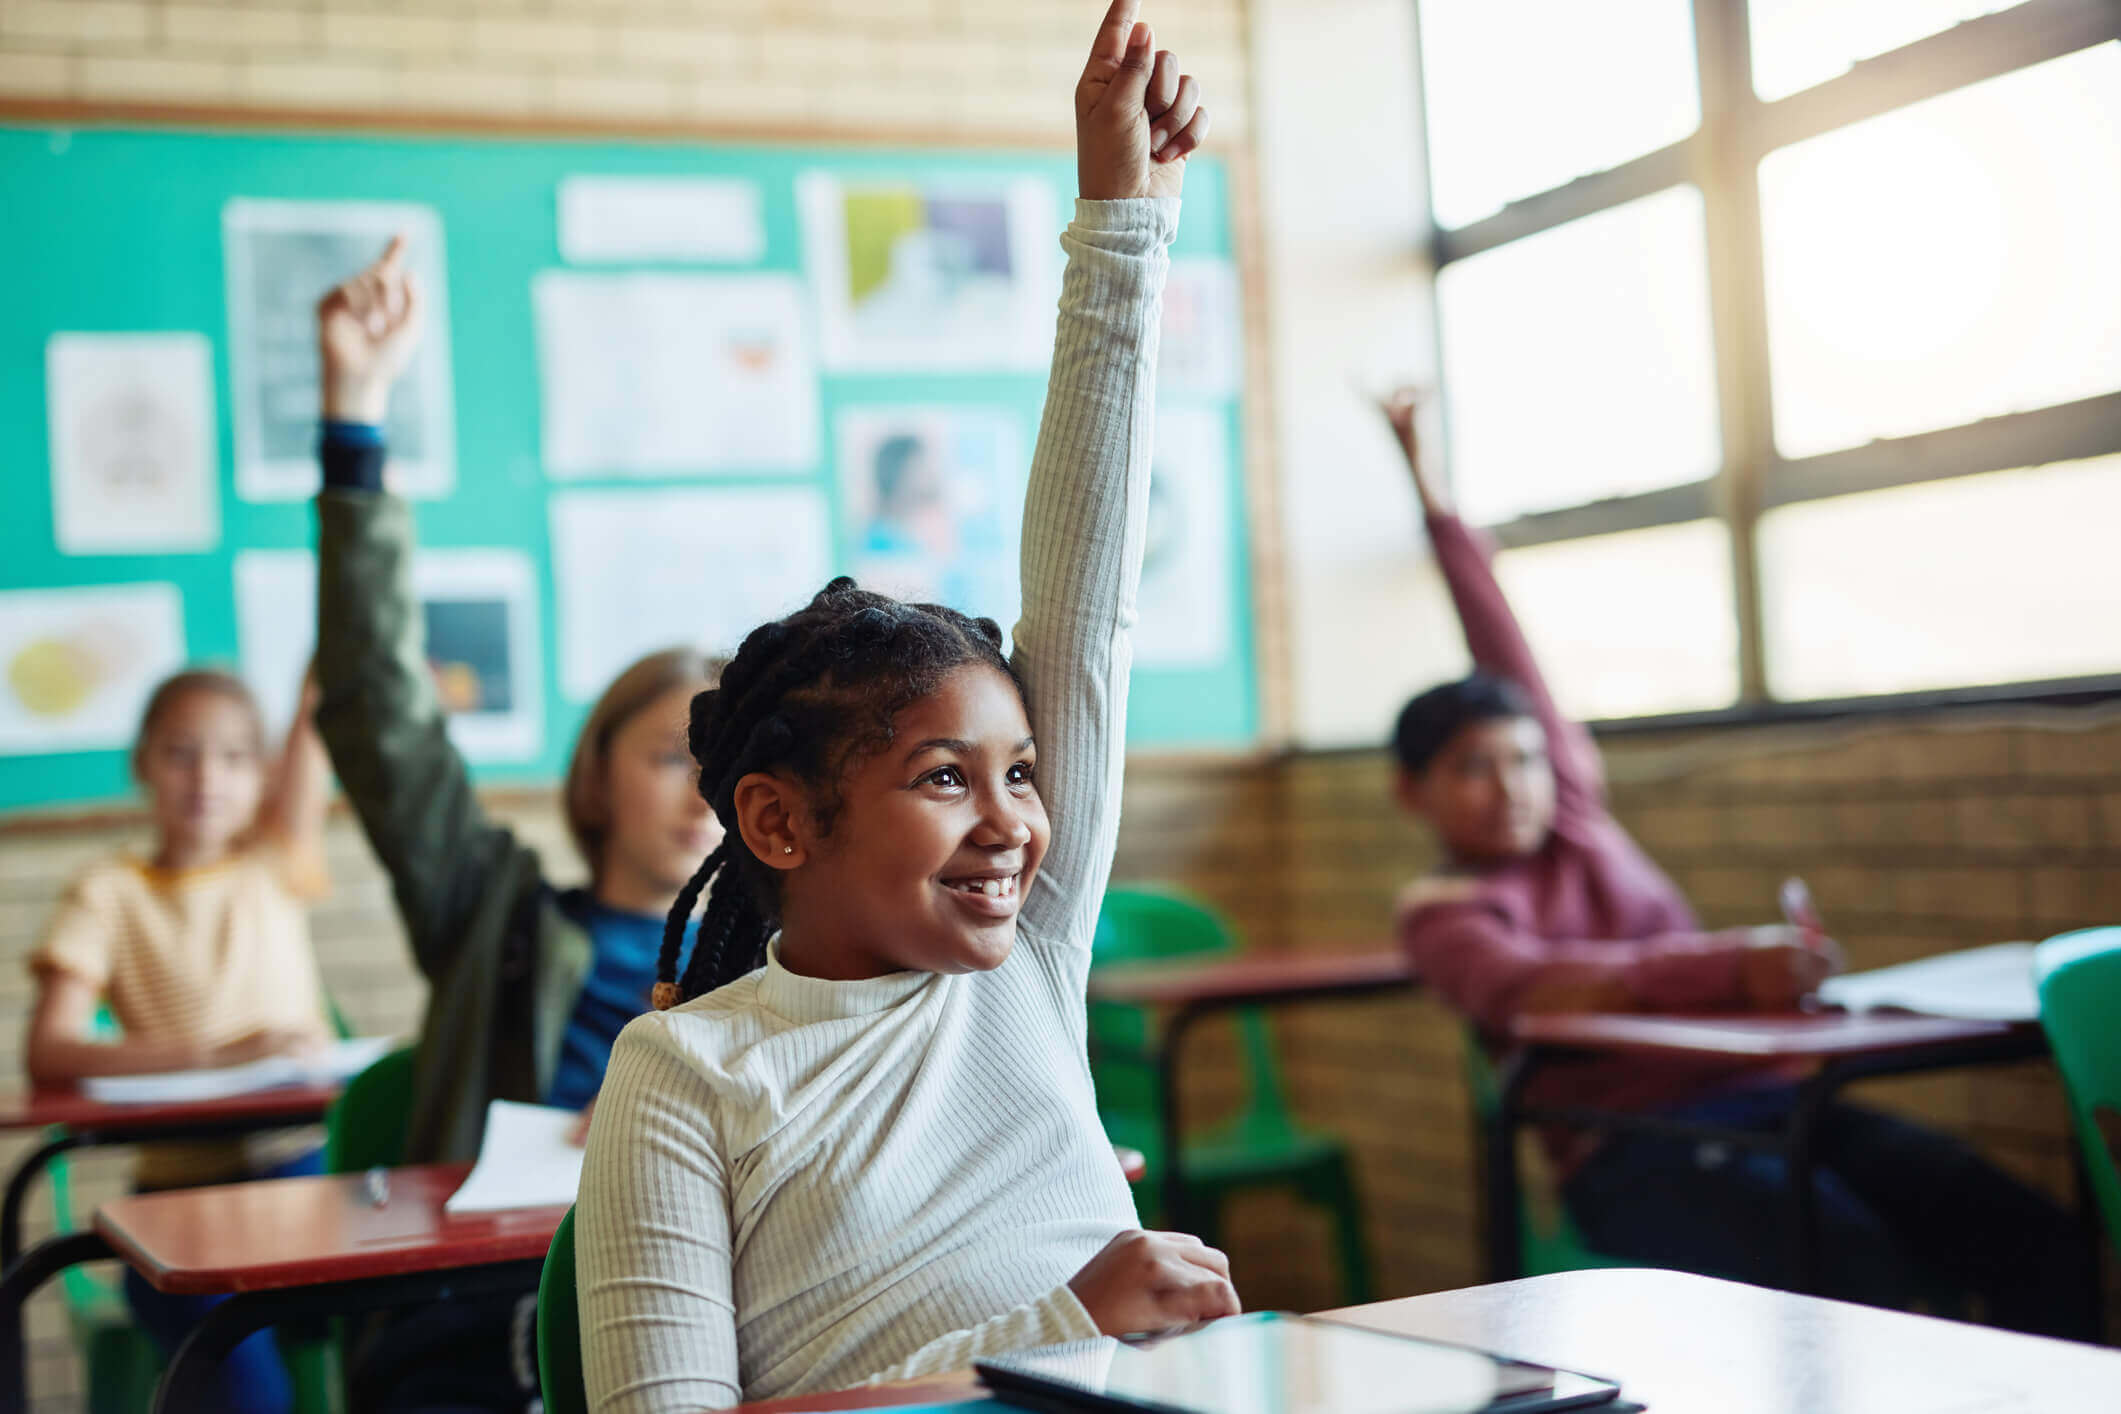 Confident young children raising their hands in a classroom